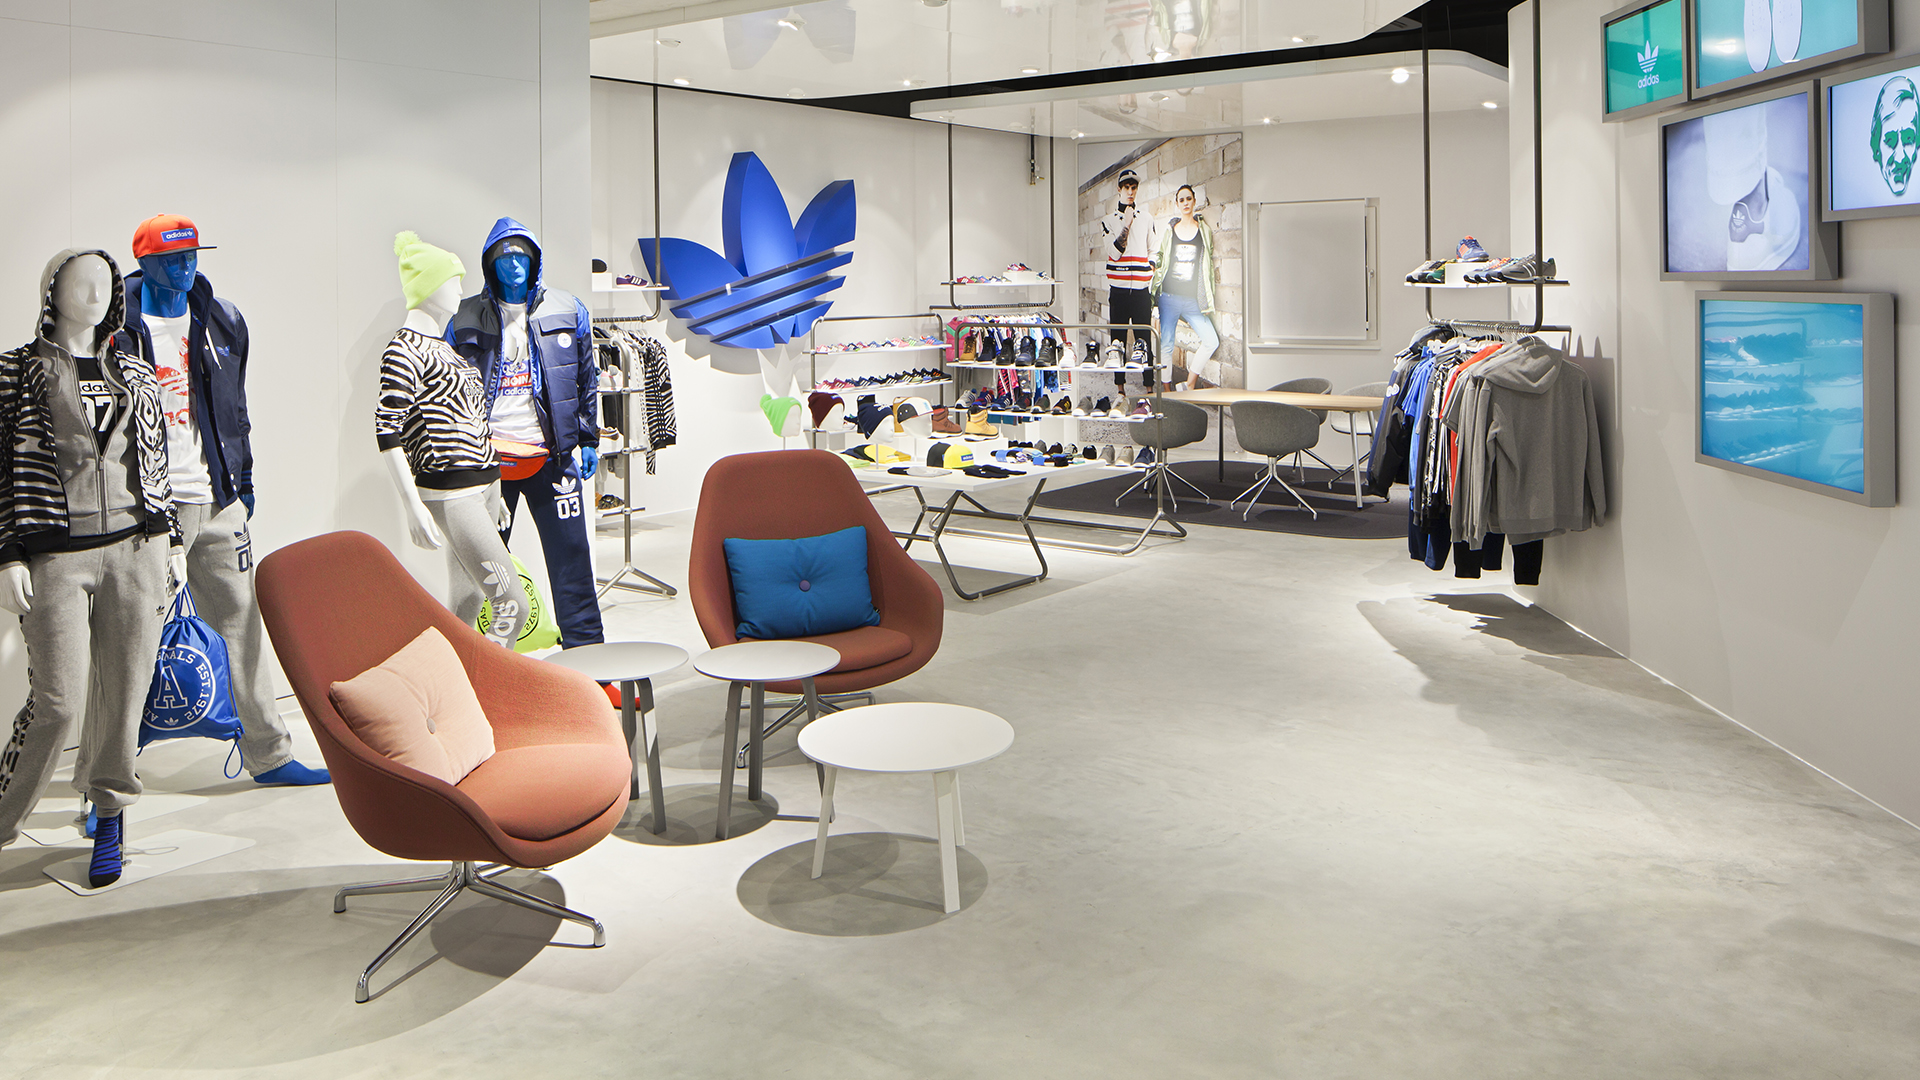 Dart stages the adidas shop concept for the OCM 2014